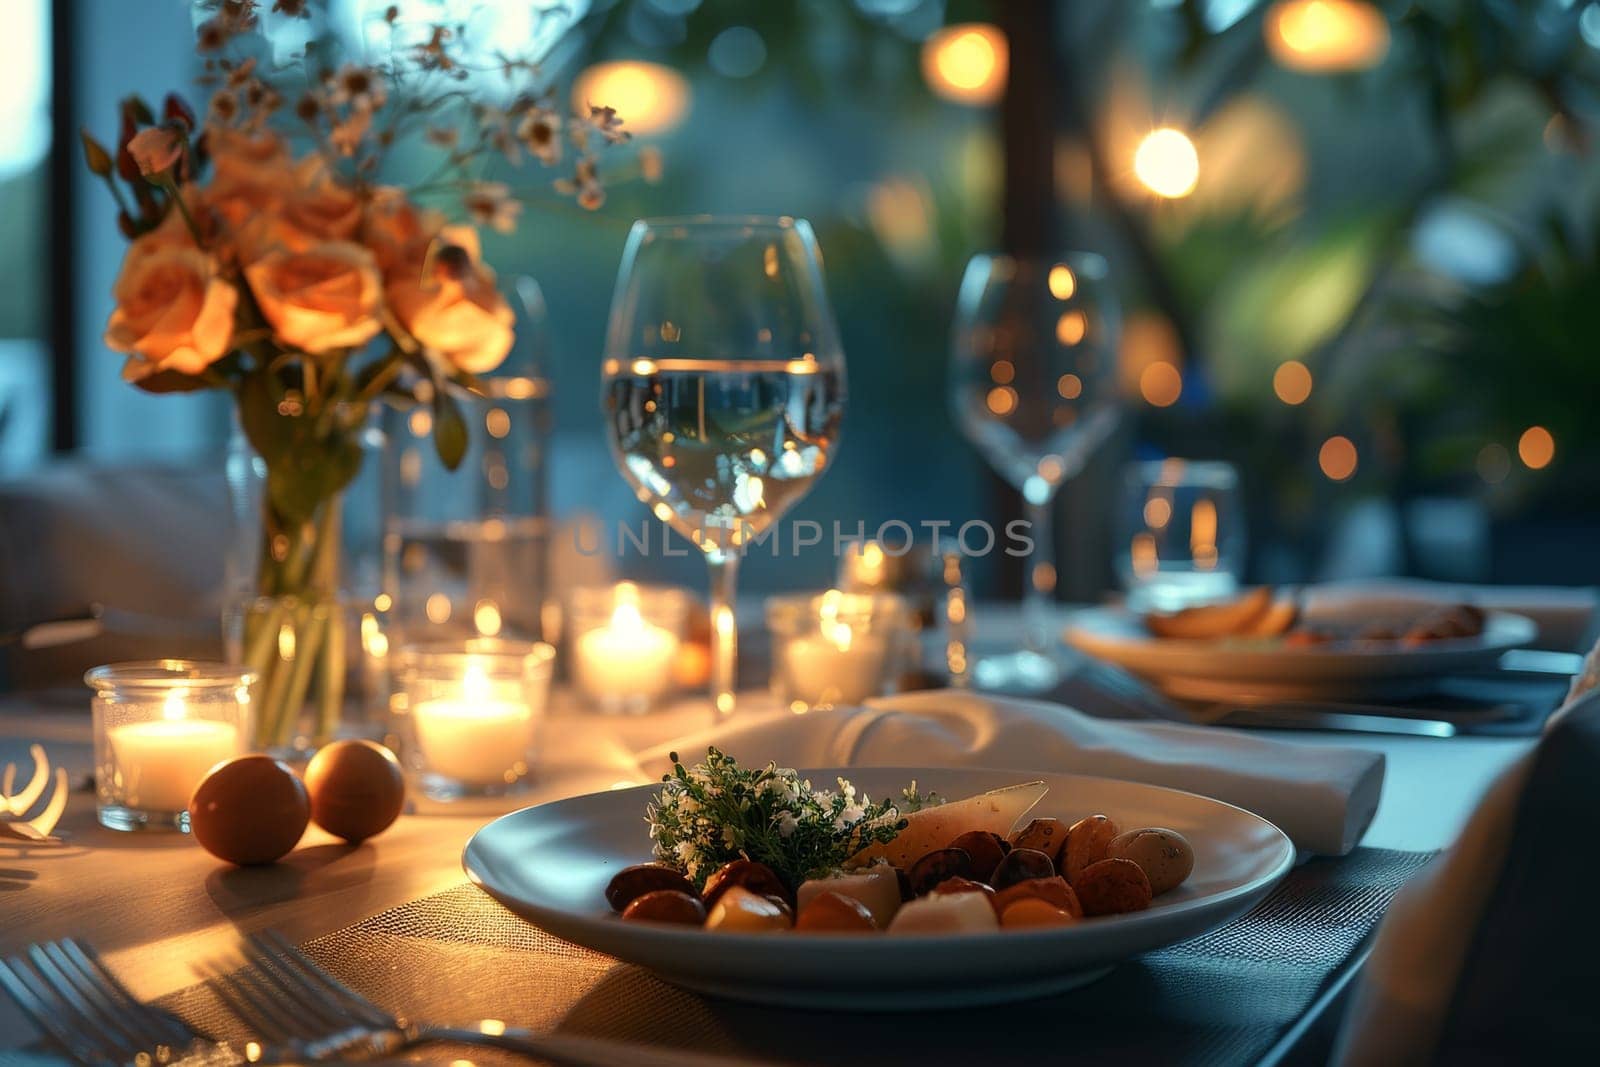 A table with two white plates and two wine glasses, with a vase of flowers in the middle. The table is set for two people and the atmosphere is elegant and intimate